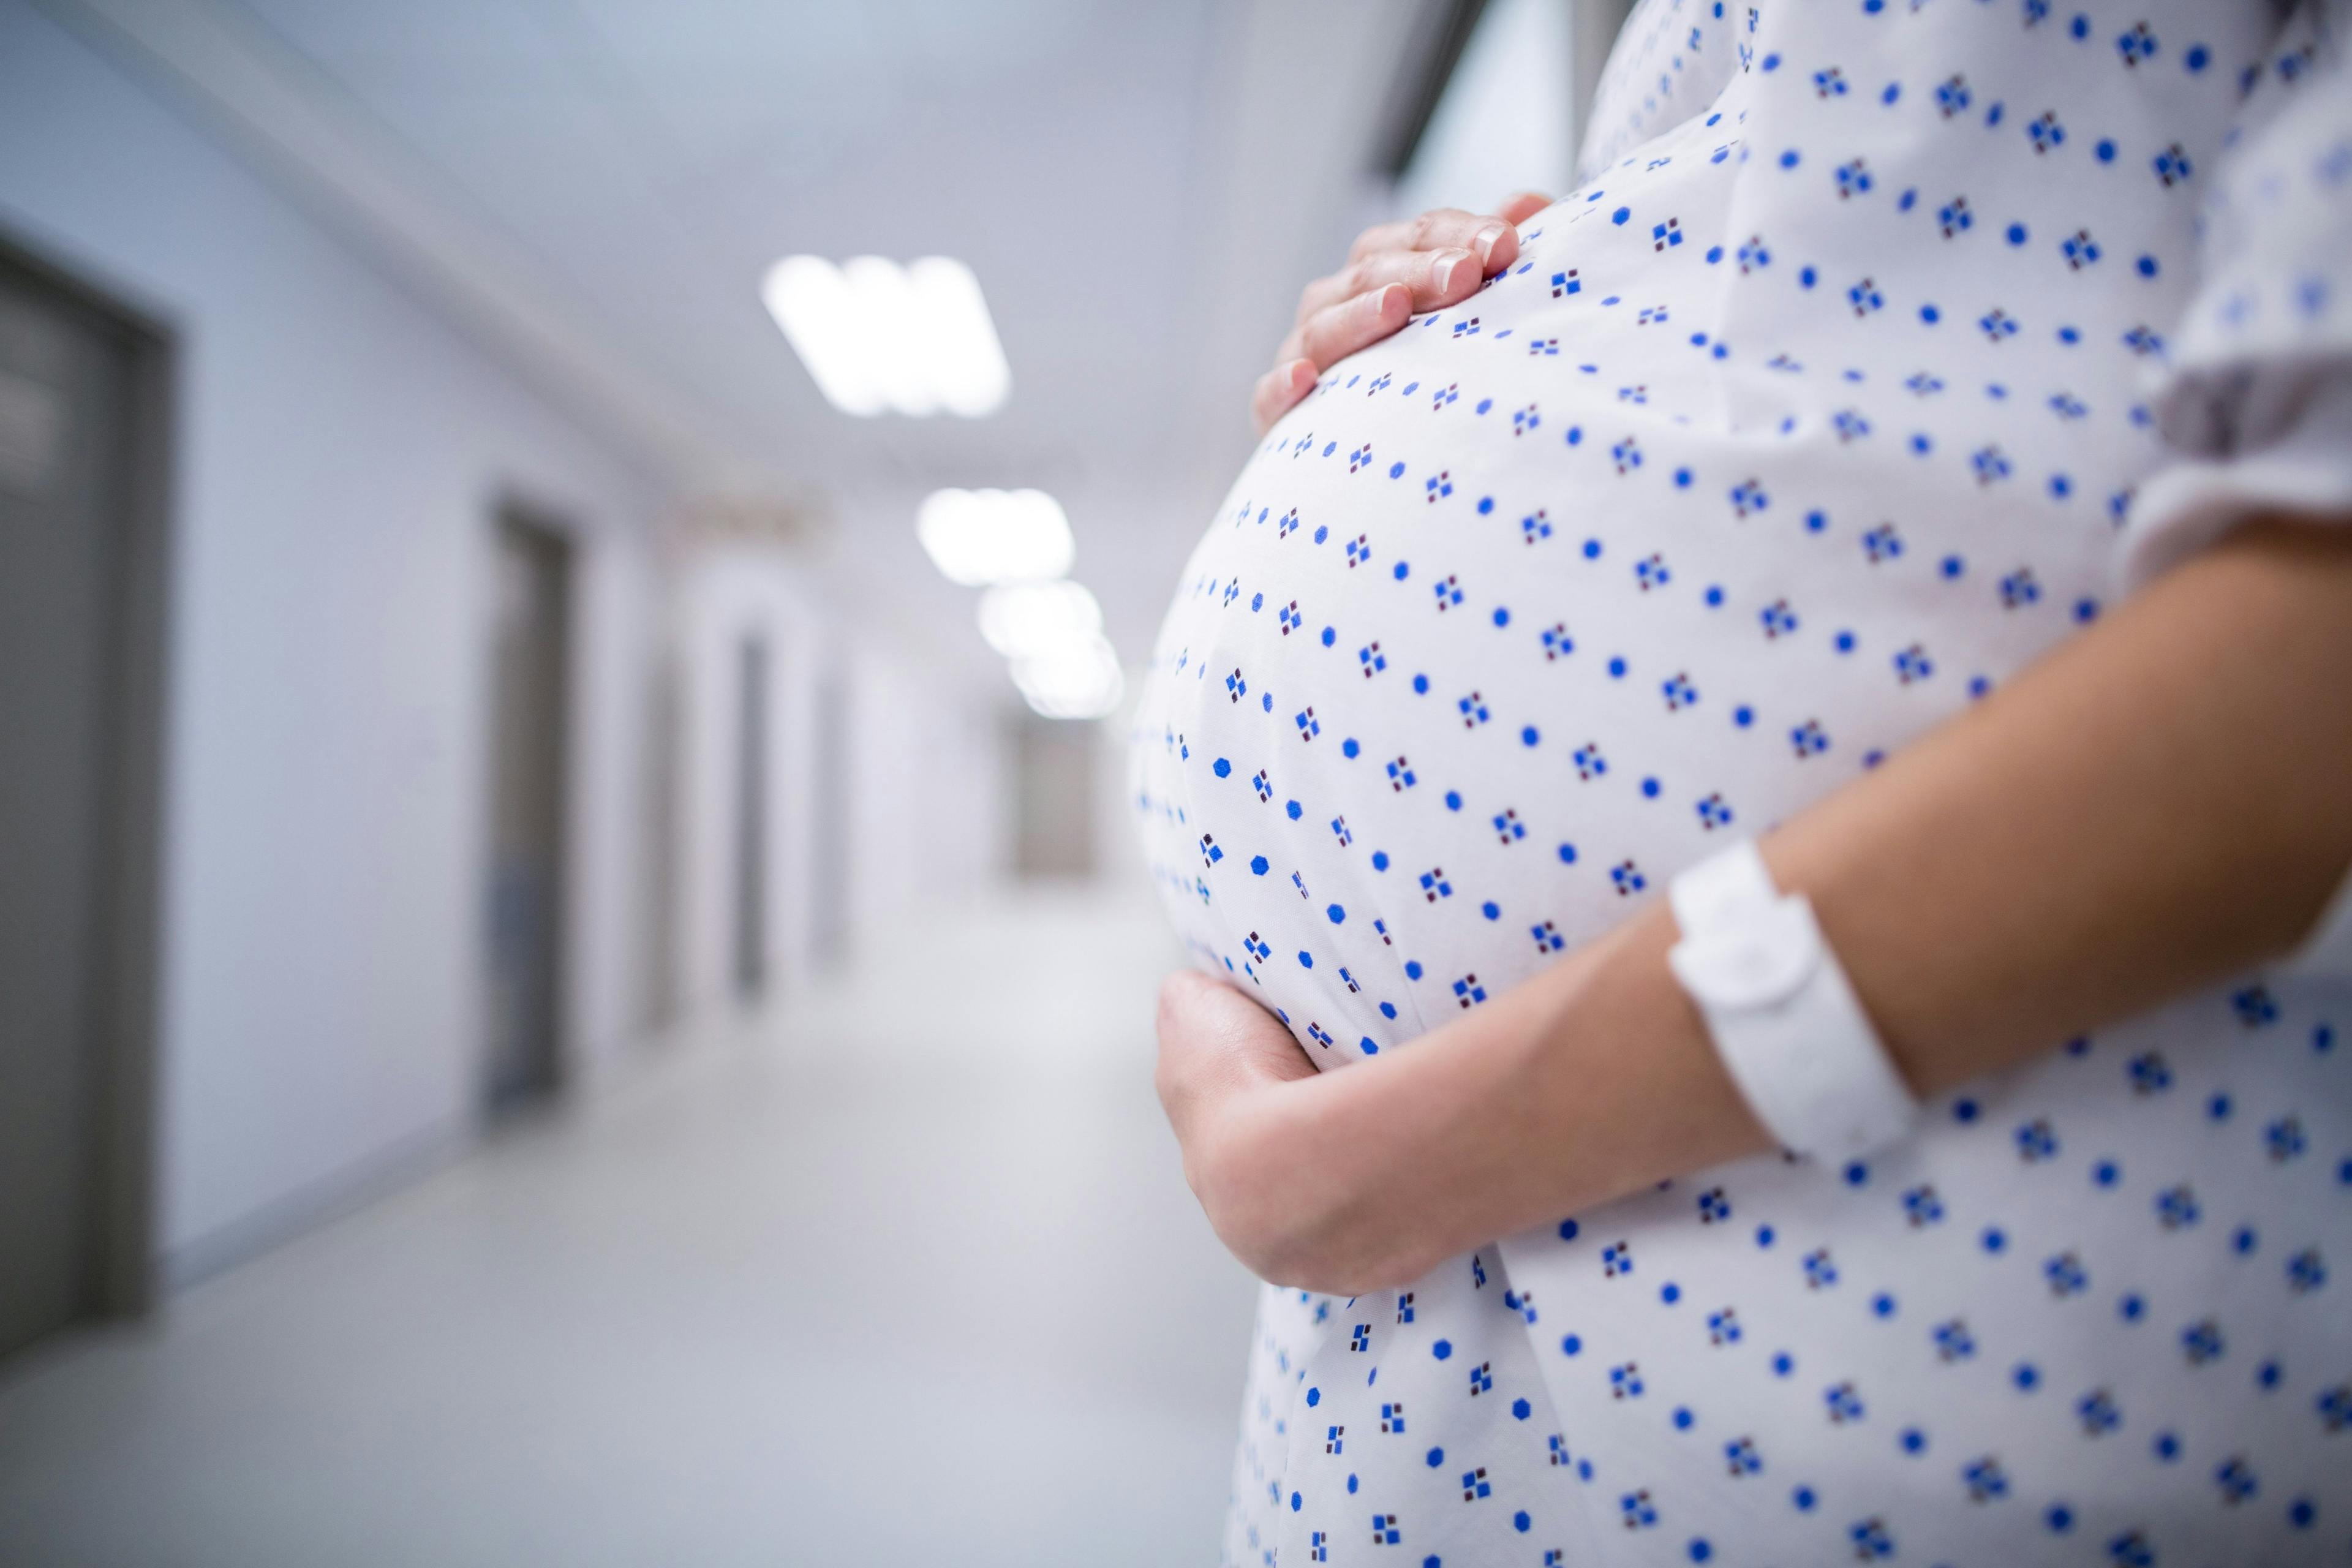 Placental protein imbalance may predict preeclampsia risk